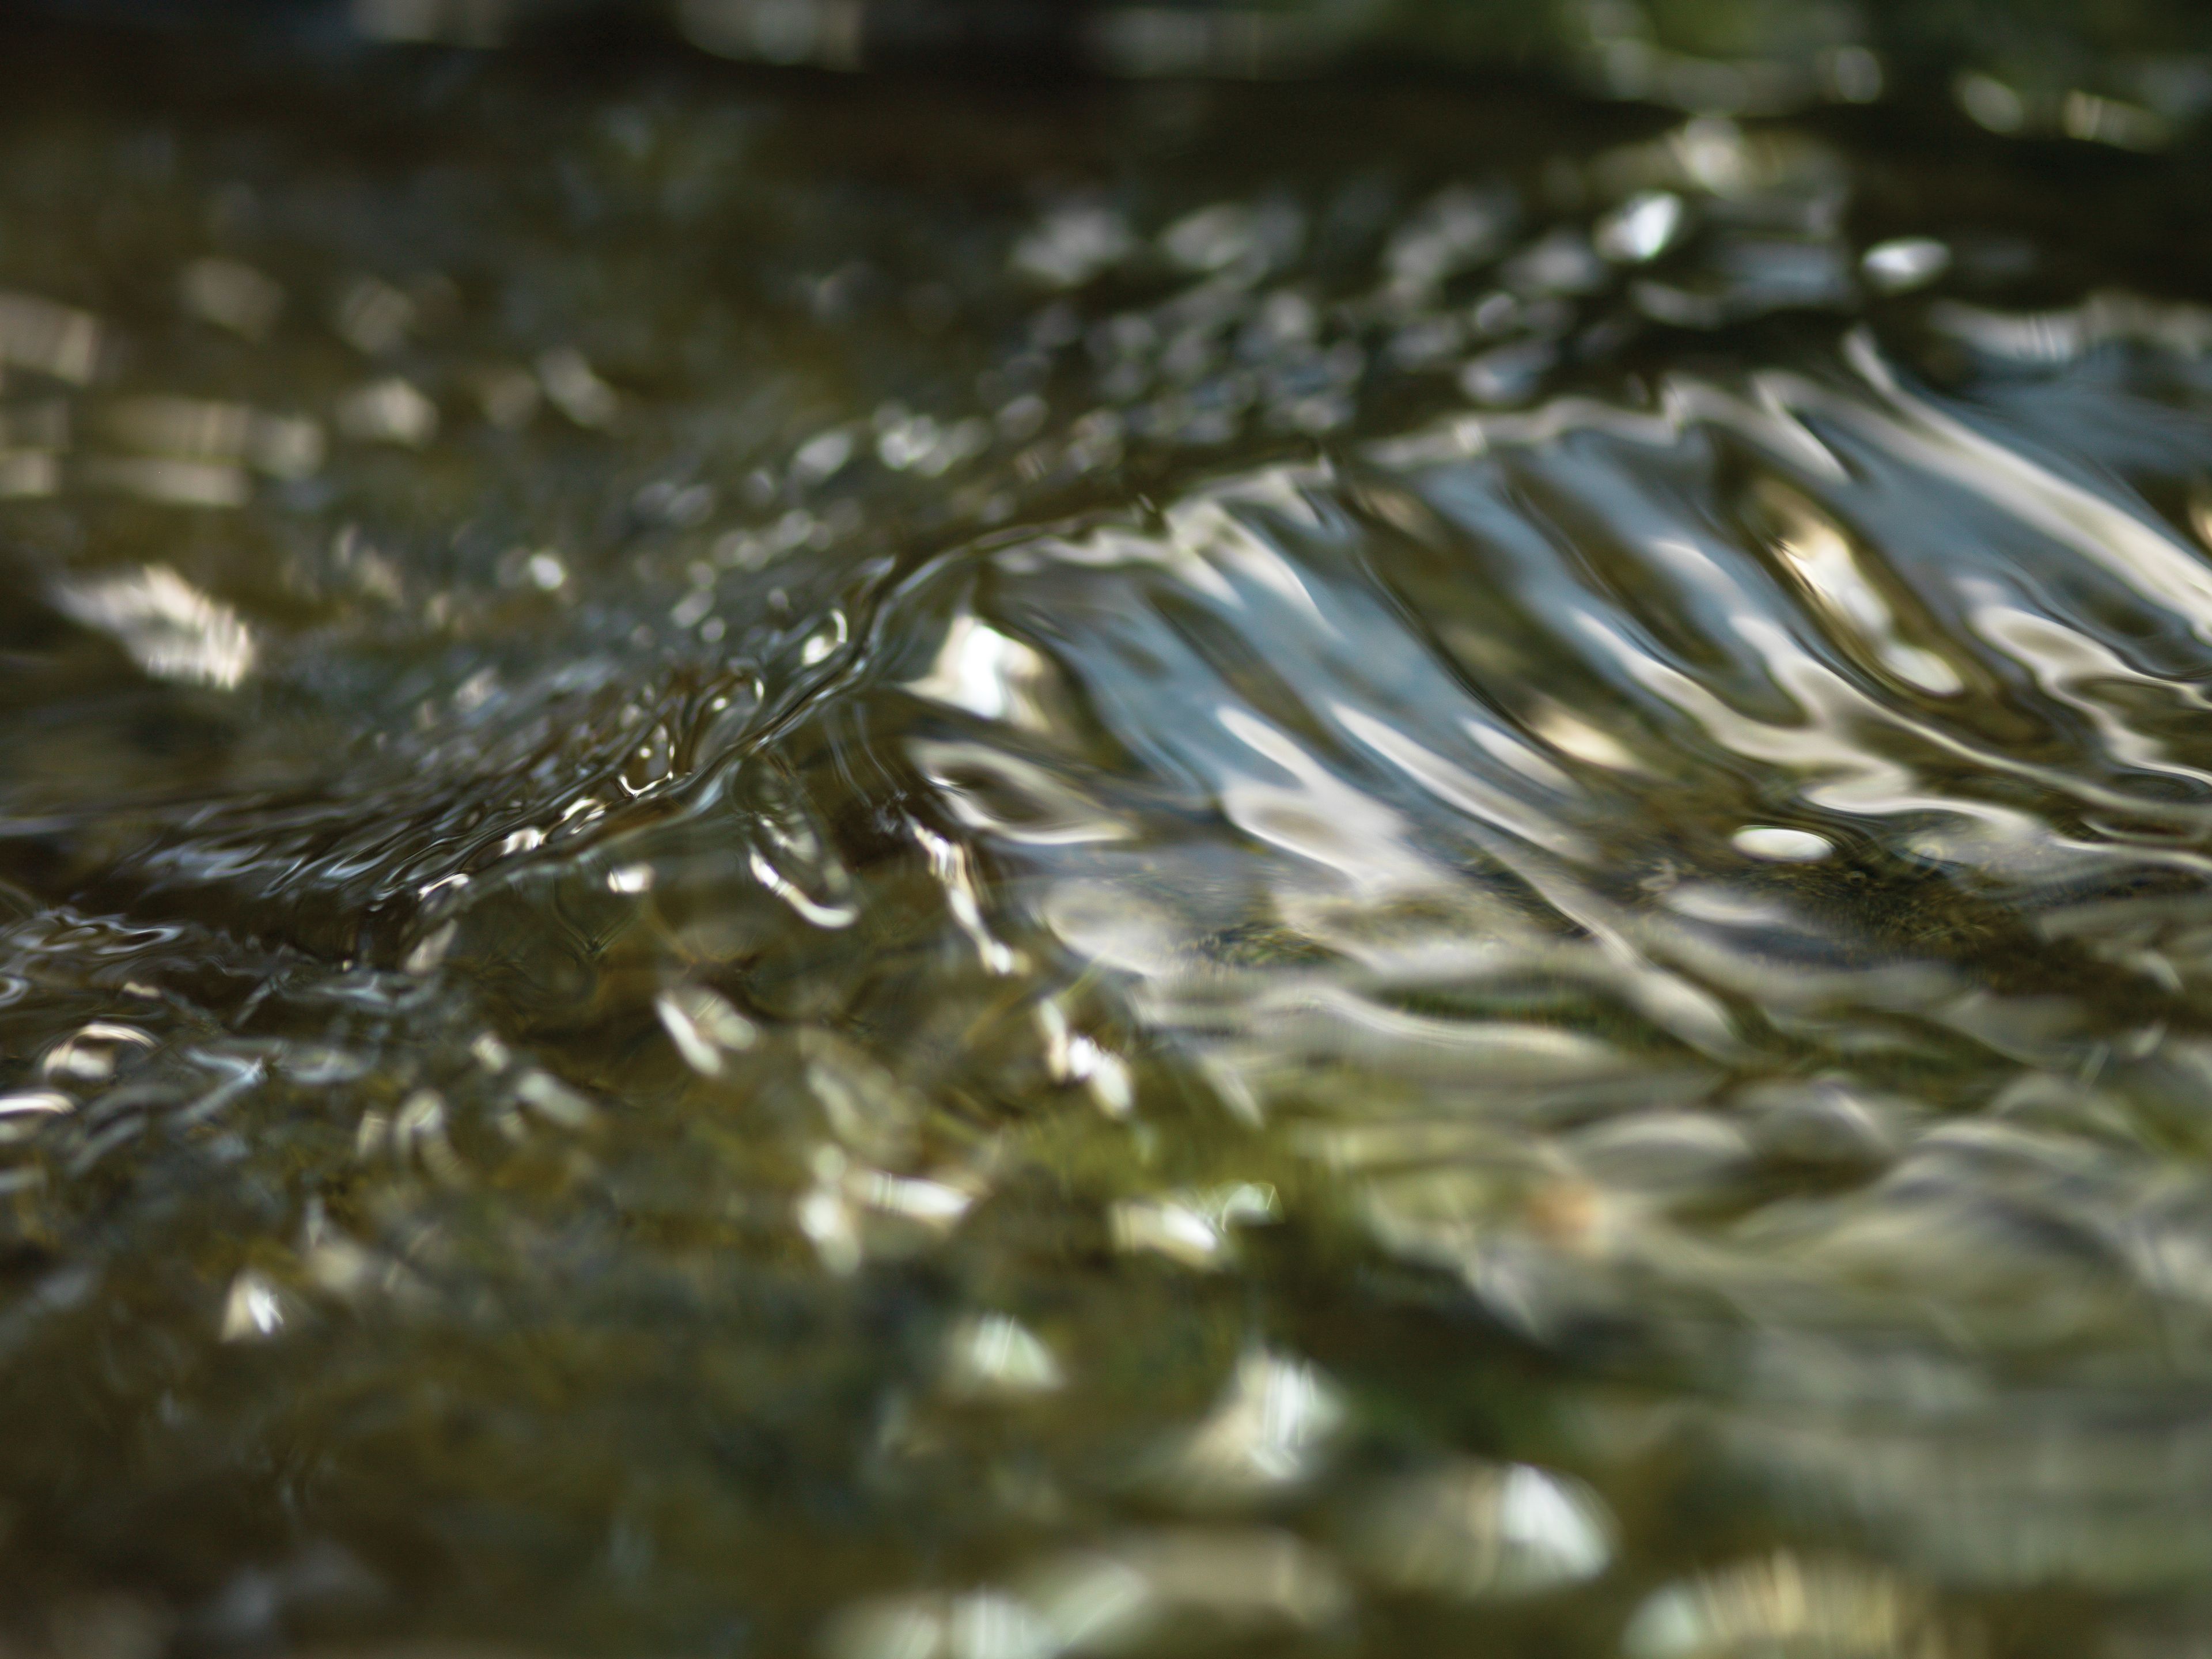 A small wave in river water reflecting green vegetation overhead.